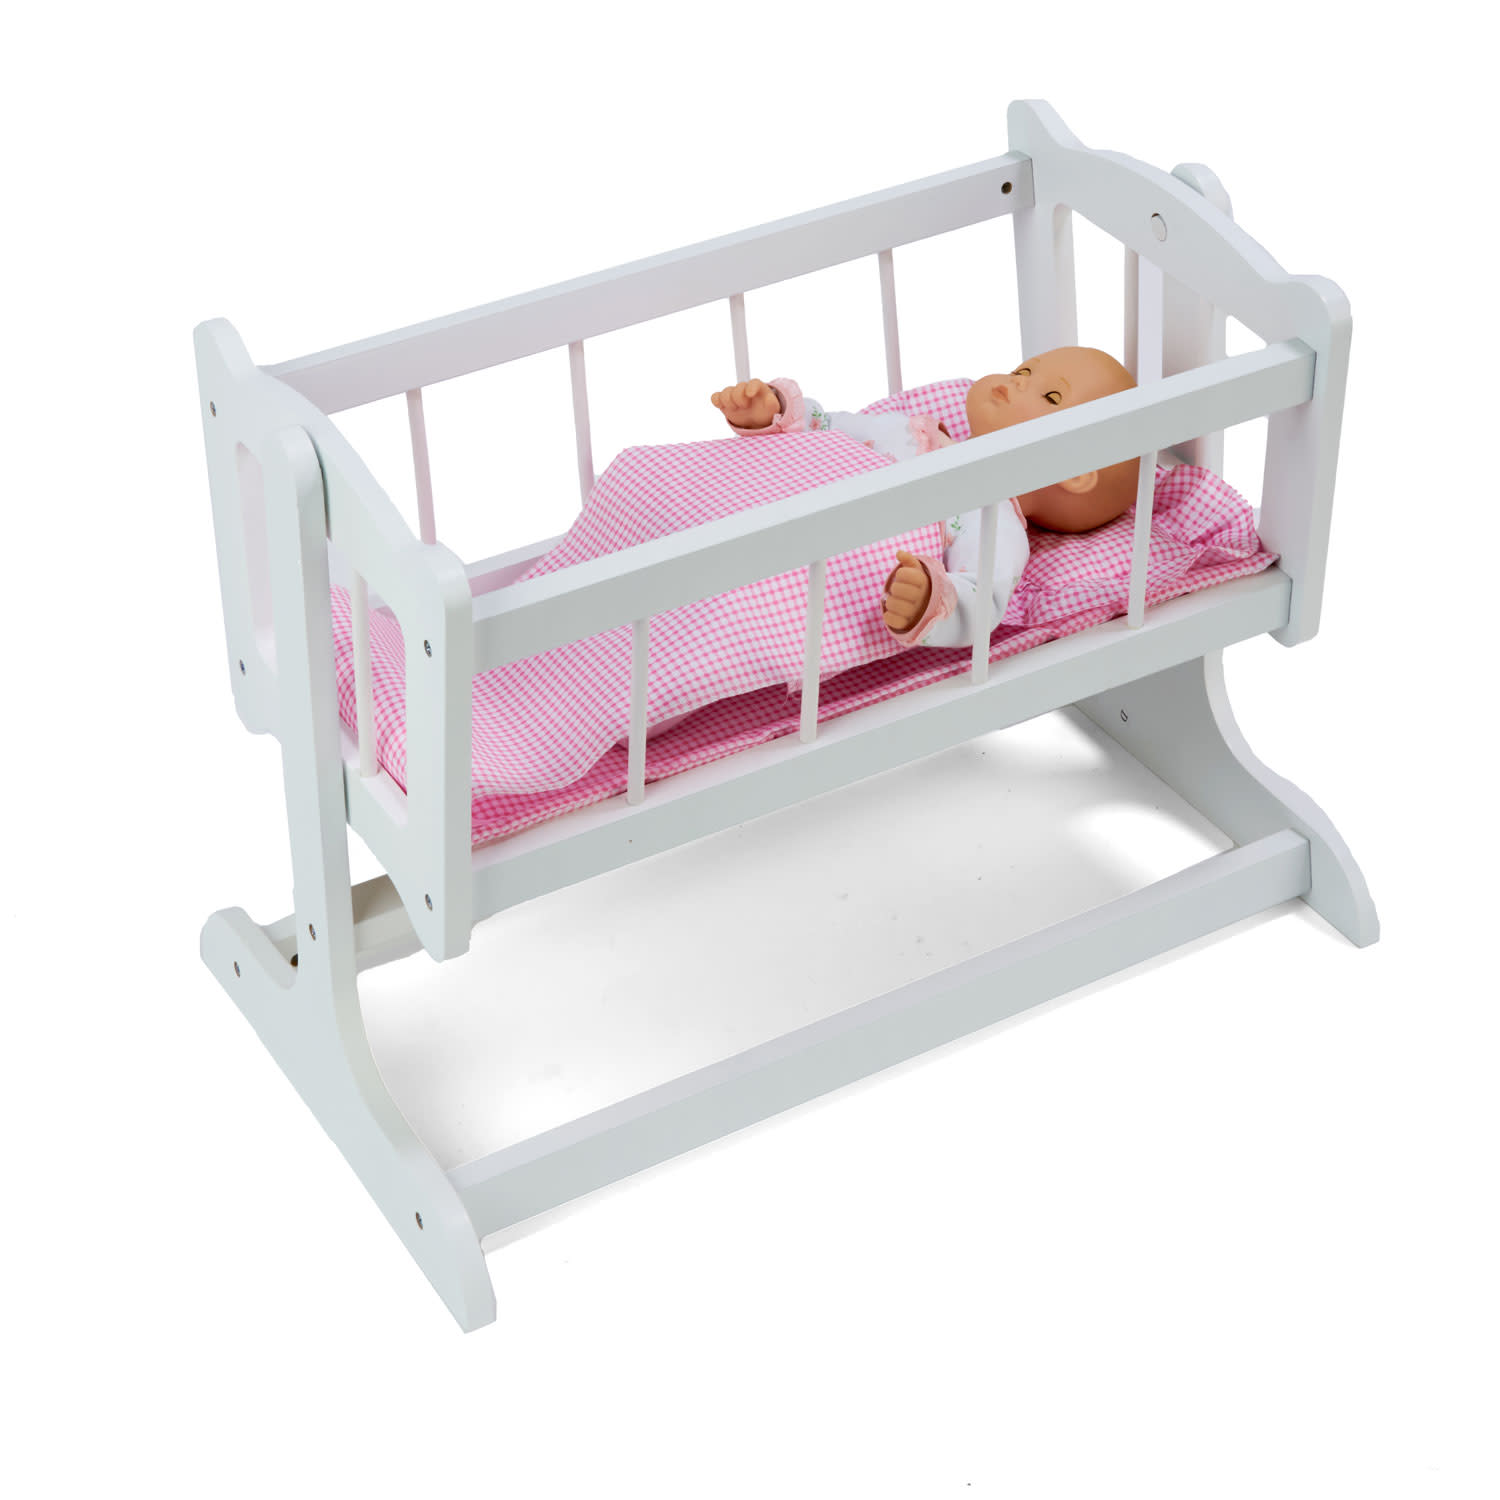 Badger Basket Heirloom Style Doll Cradle with Bedding - White/Pink - image 5 of 8